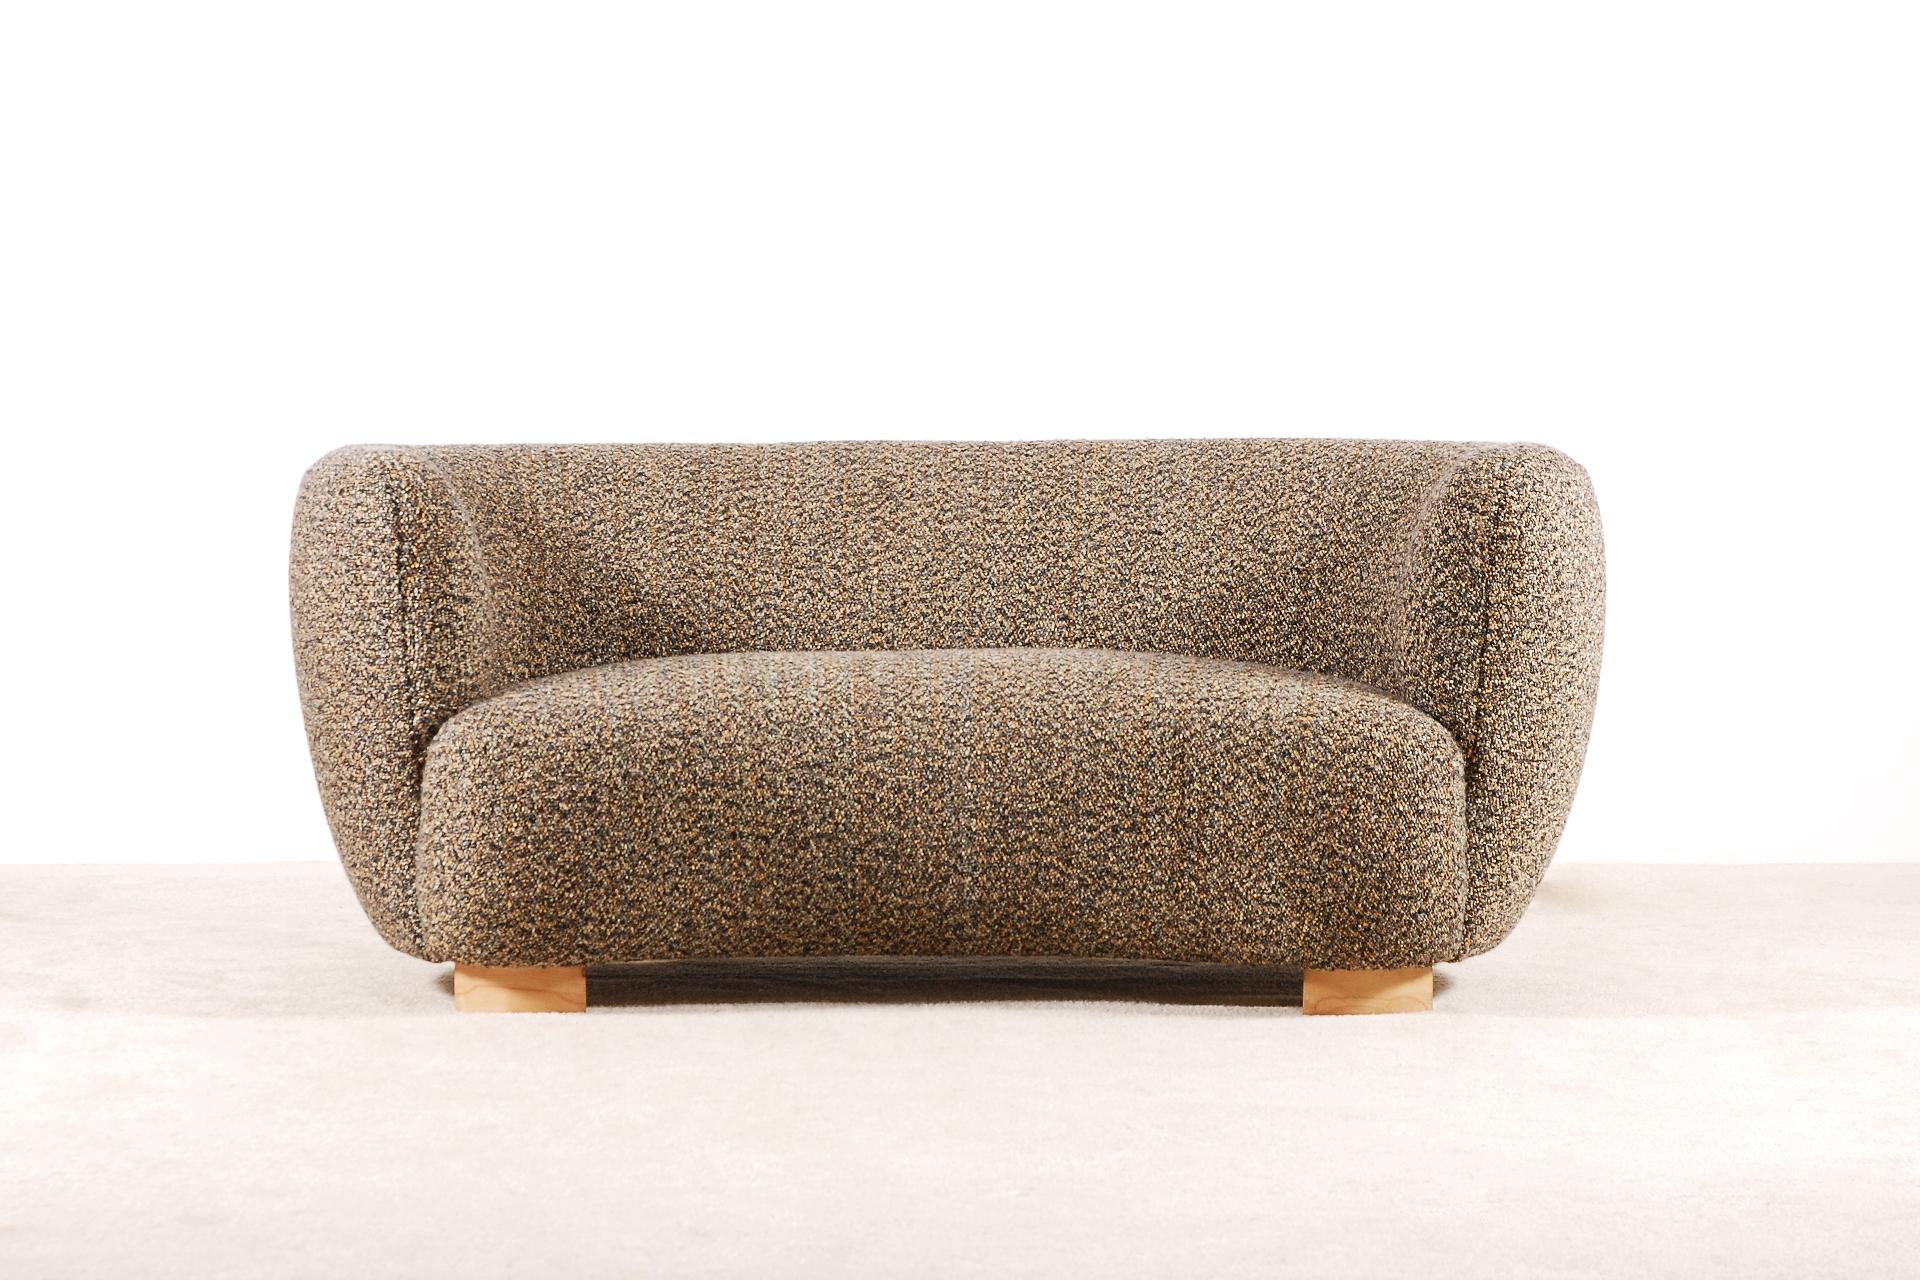 Very elegant two-seat curved sofa manufactured in Denmark during the 1940s.
Lovely shape and curves. Very comfortable seat.
Oakwood natural color waxed feet.

This sofa has been fully restored and newly upholstered in the traditional way by the